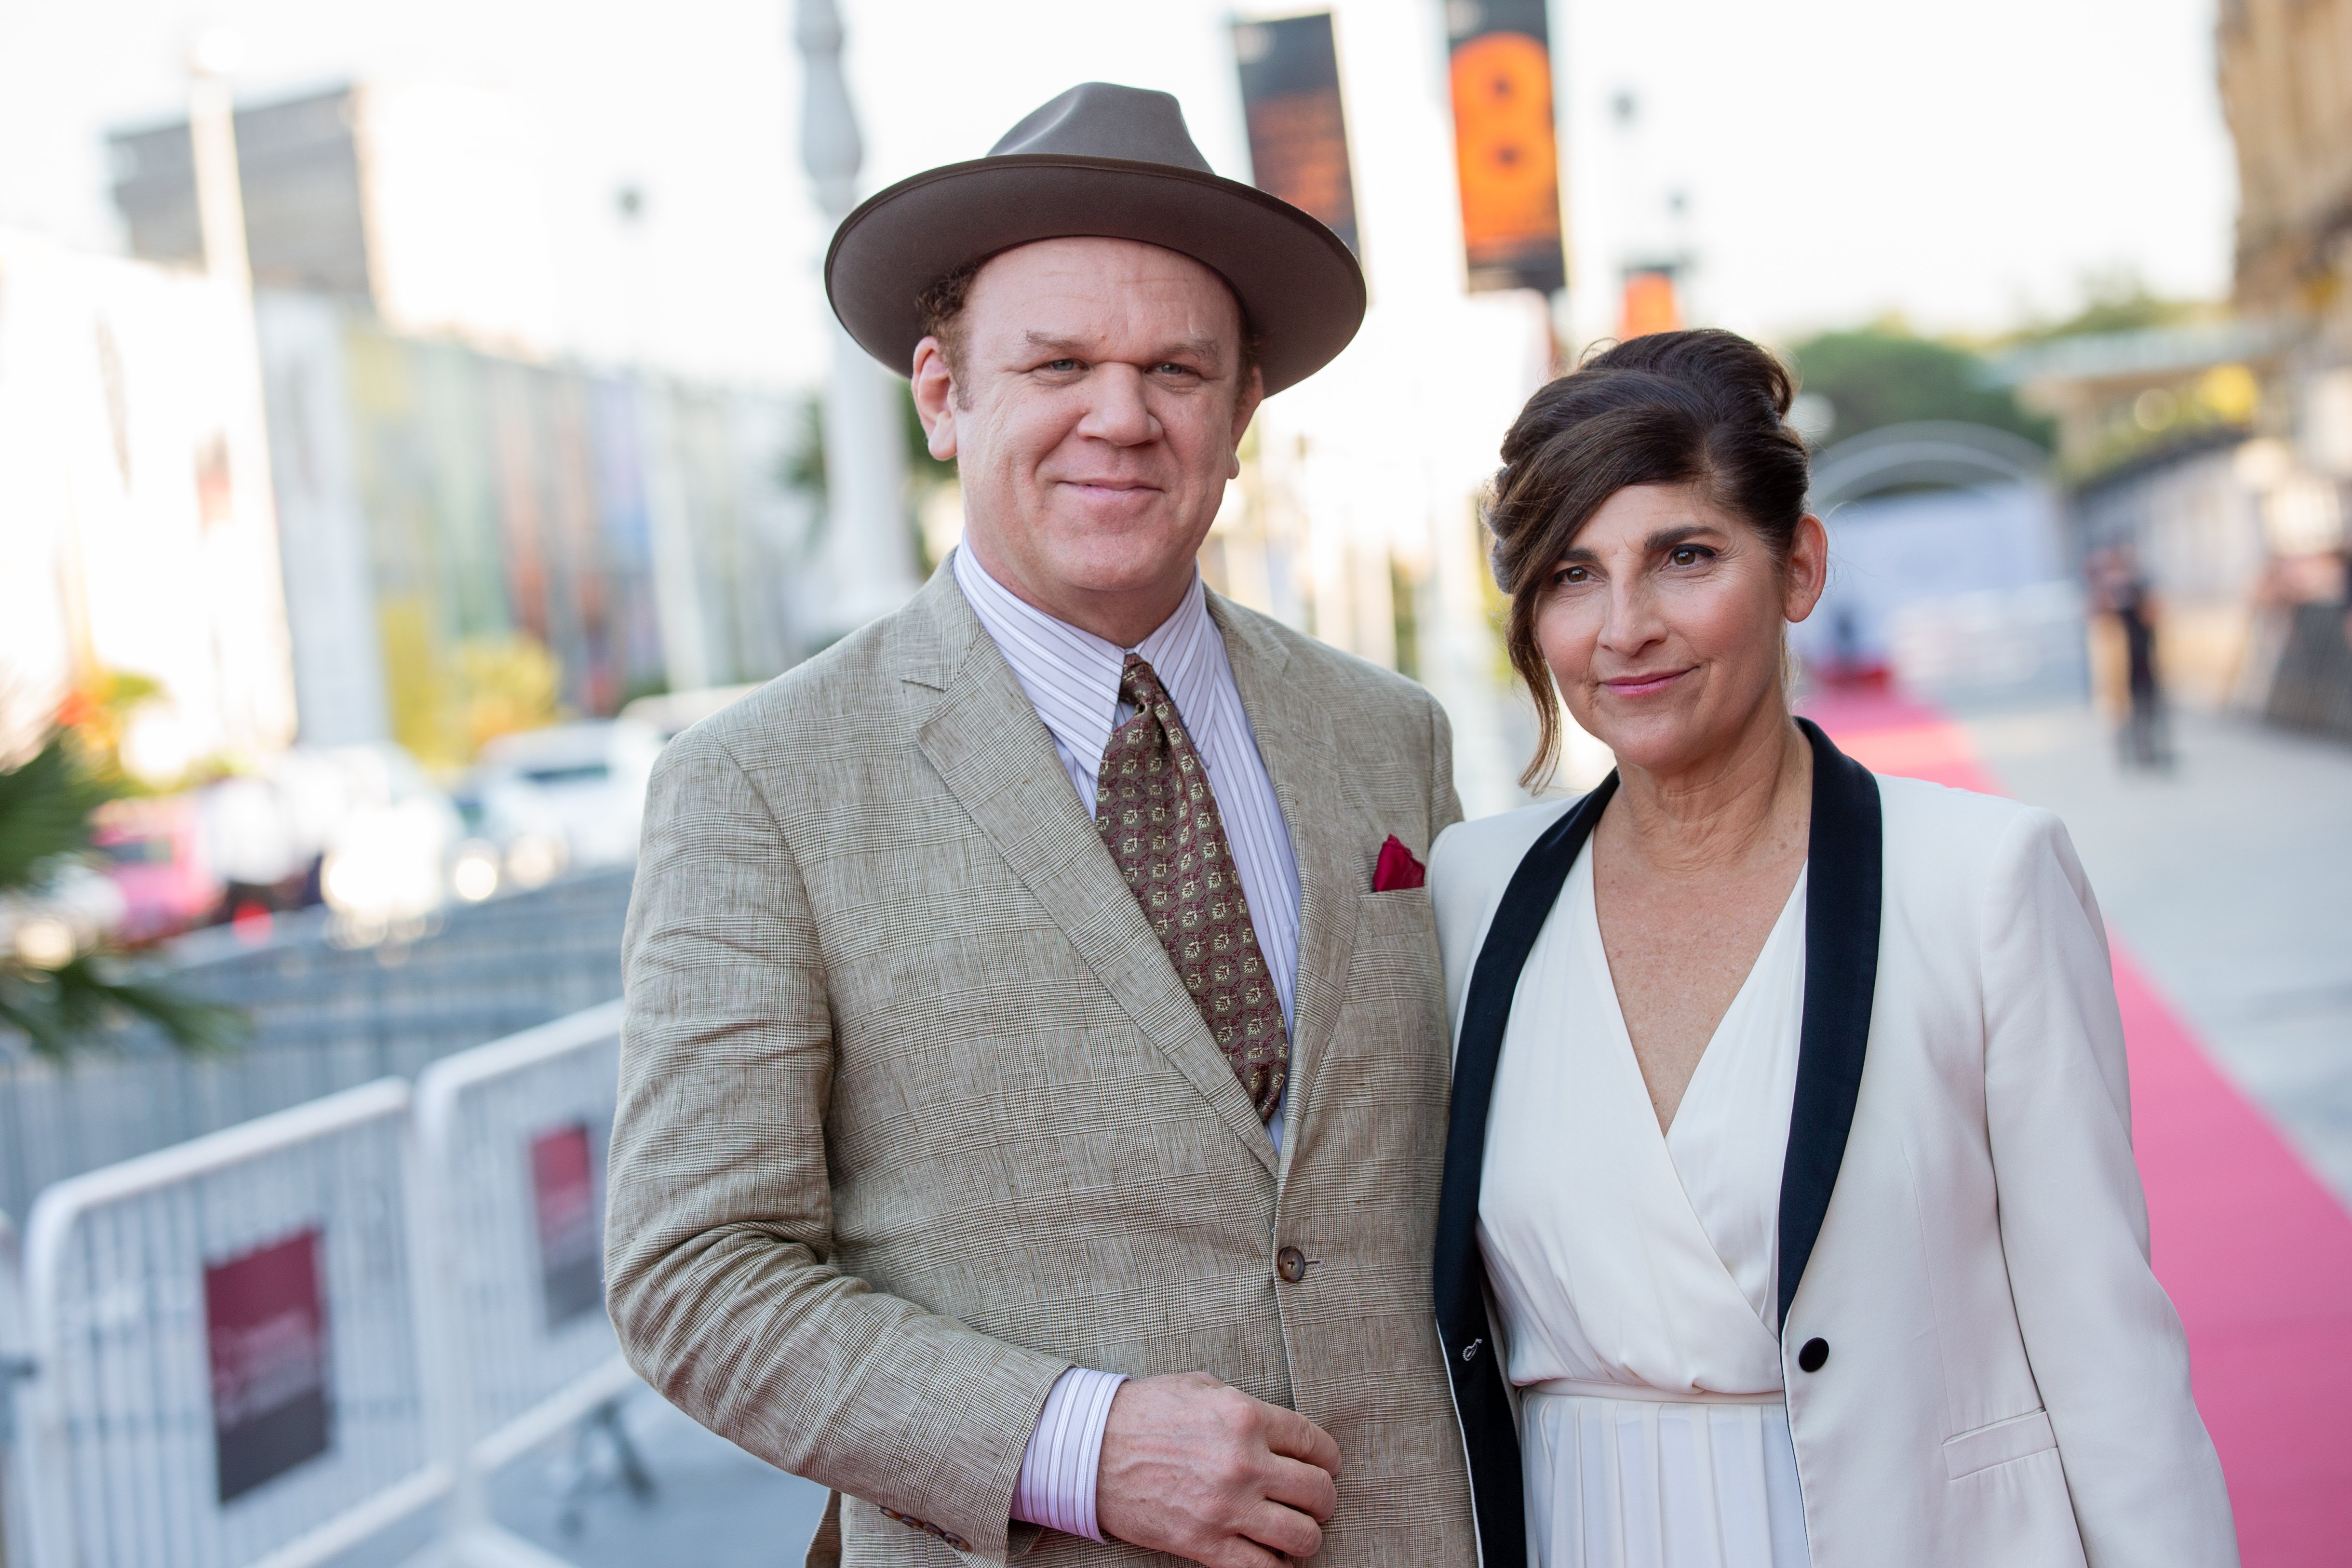 John C. Reilly and his wife Alison Dickey attend 'The sisters brothers' premiere during 66th San Sebastian Film Festival at Kursaal on September 27, 2018 in San Sebastian, Spain. | Source: Getty Images